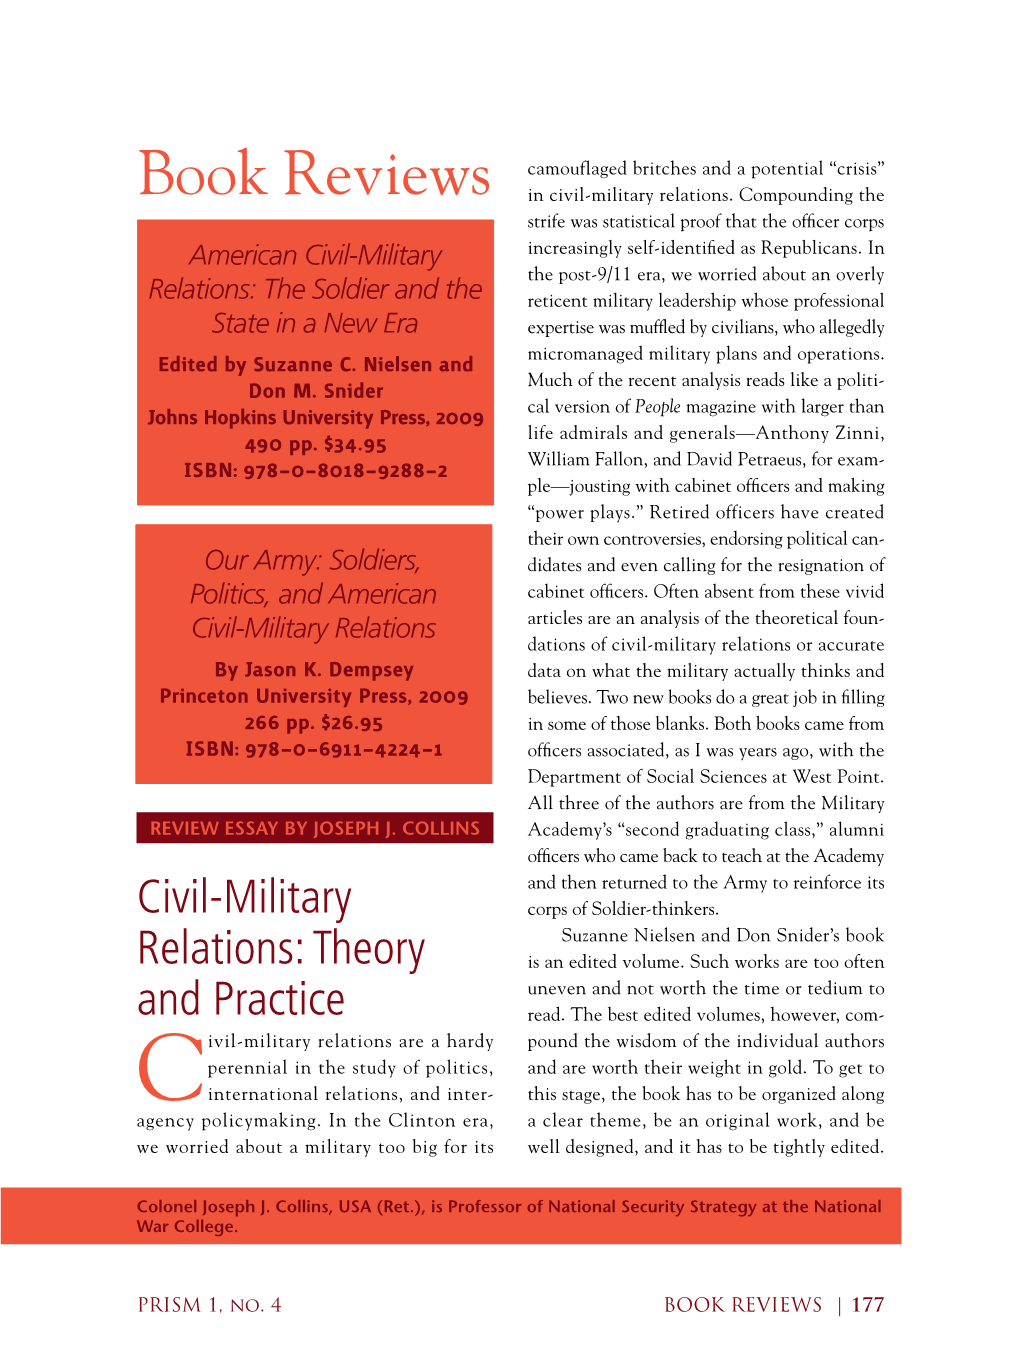 Civil-Military Relations: Theory and Practice